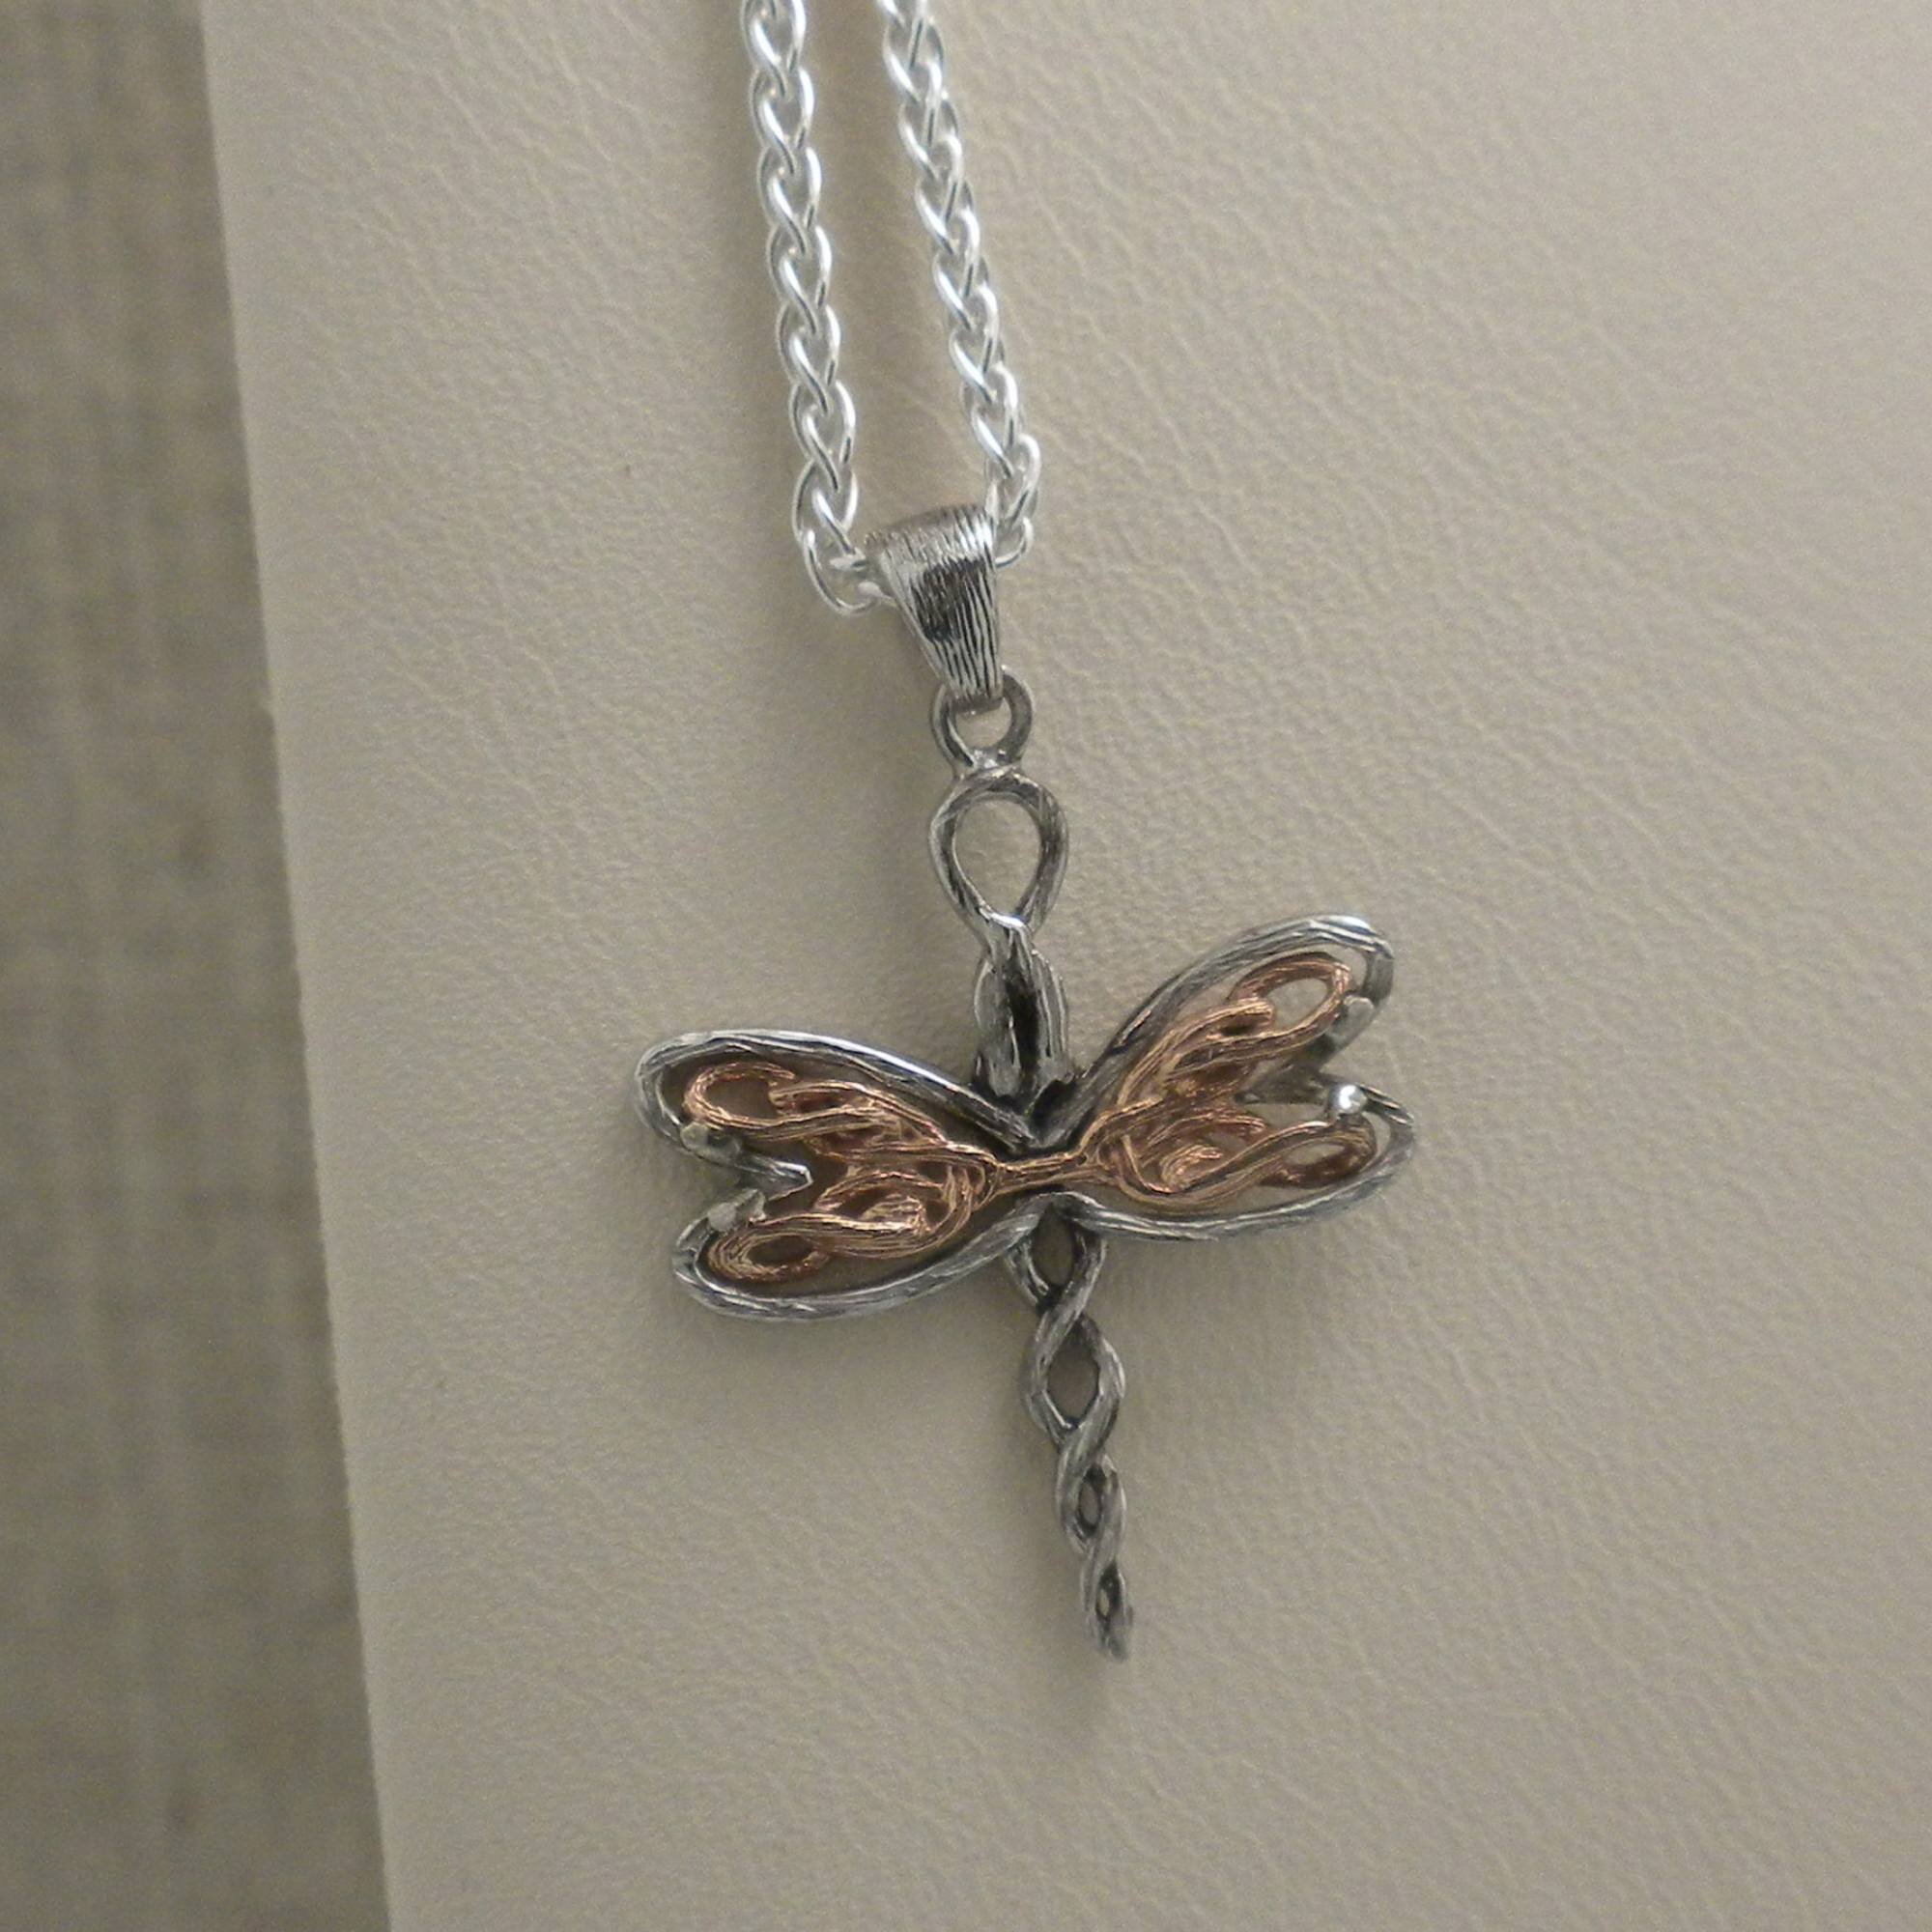 Dragonfly Pendant by Keith Jack